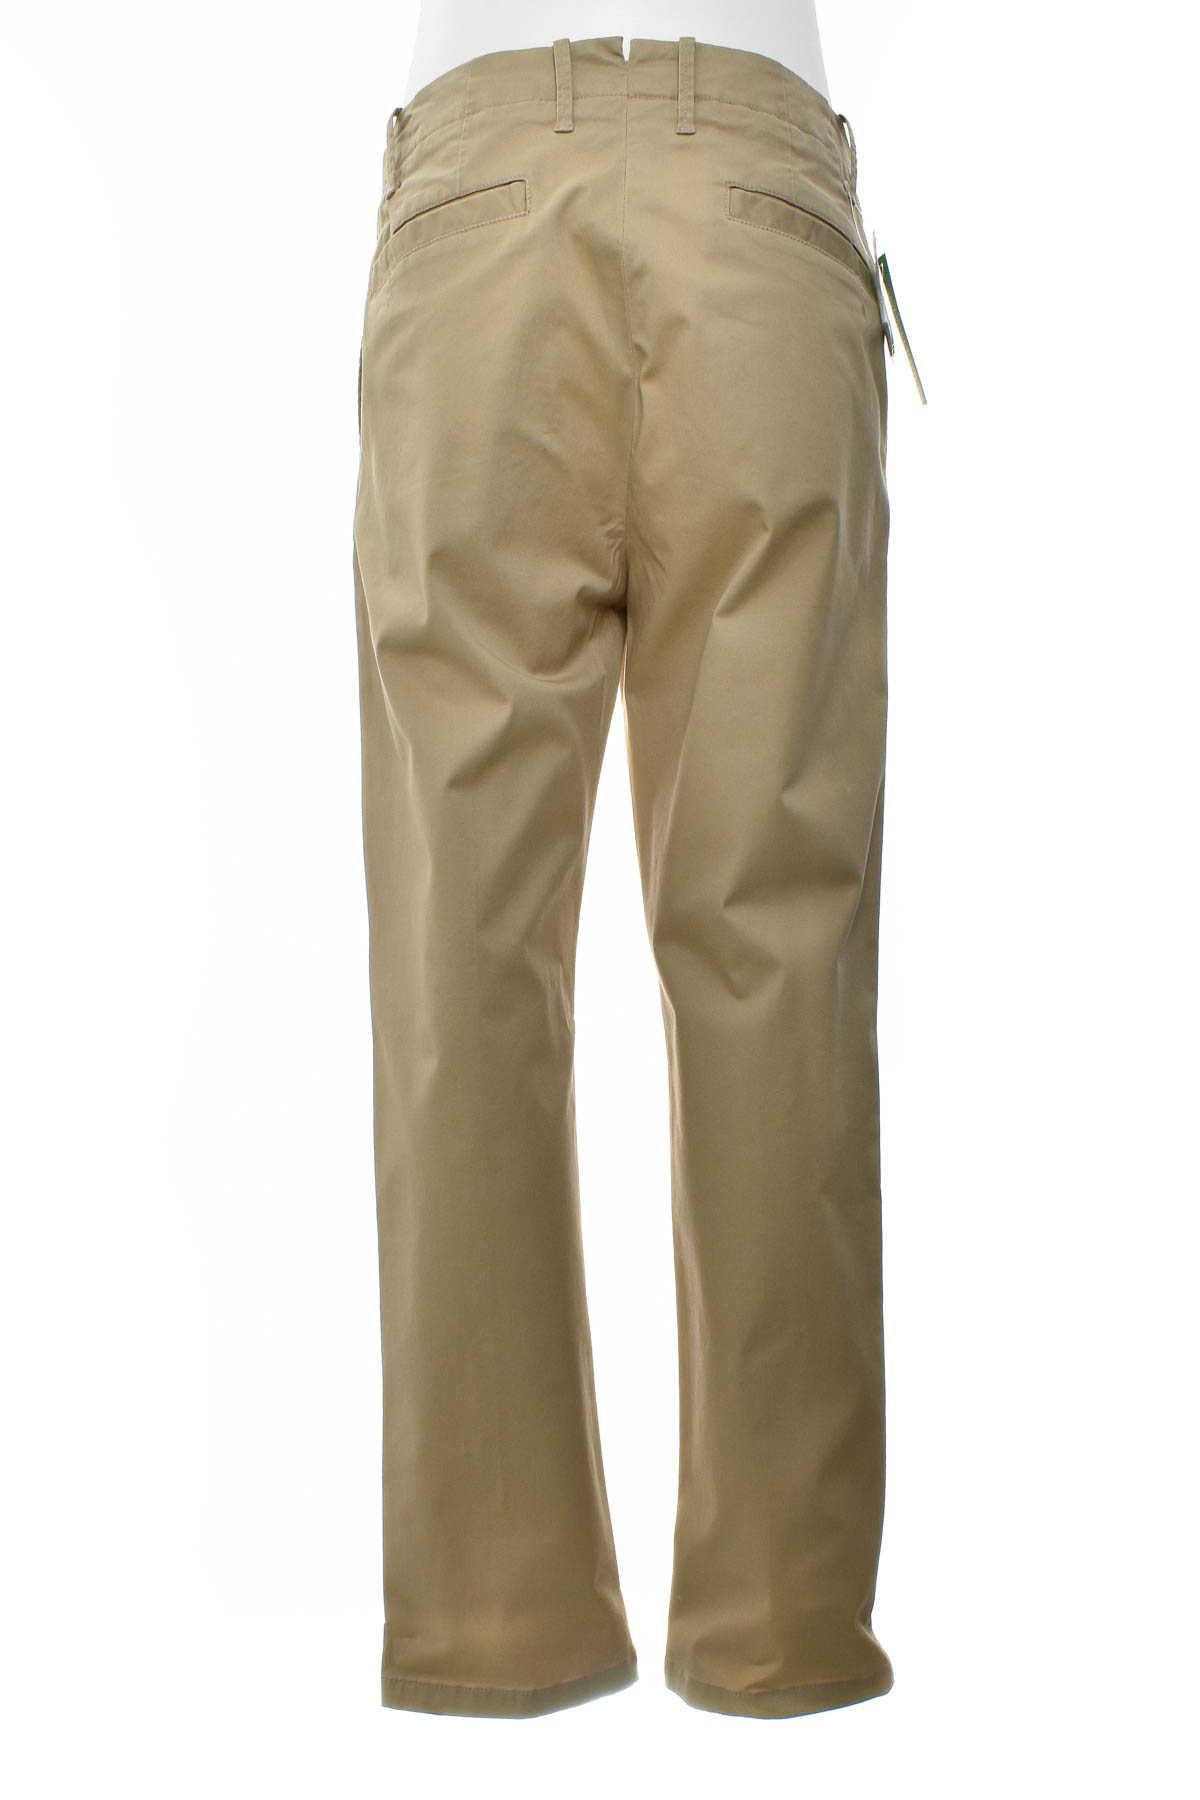 Men's trousers - United Colors of Benetton - 1